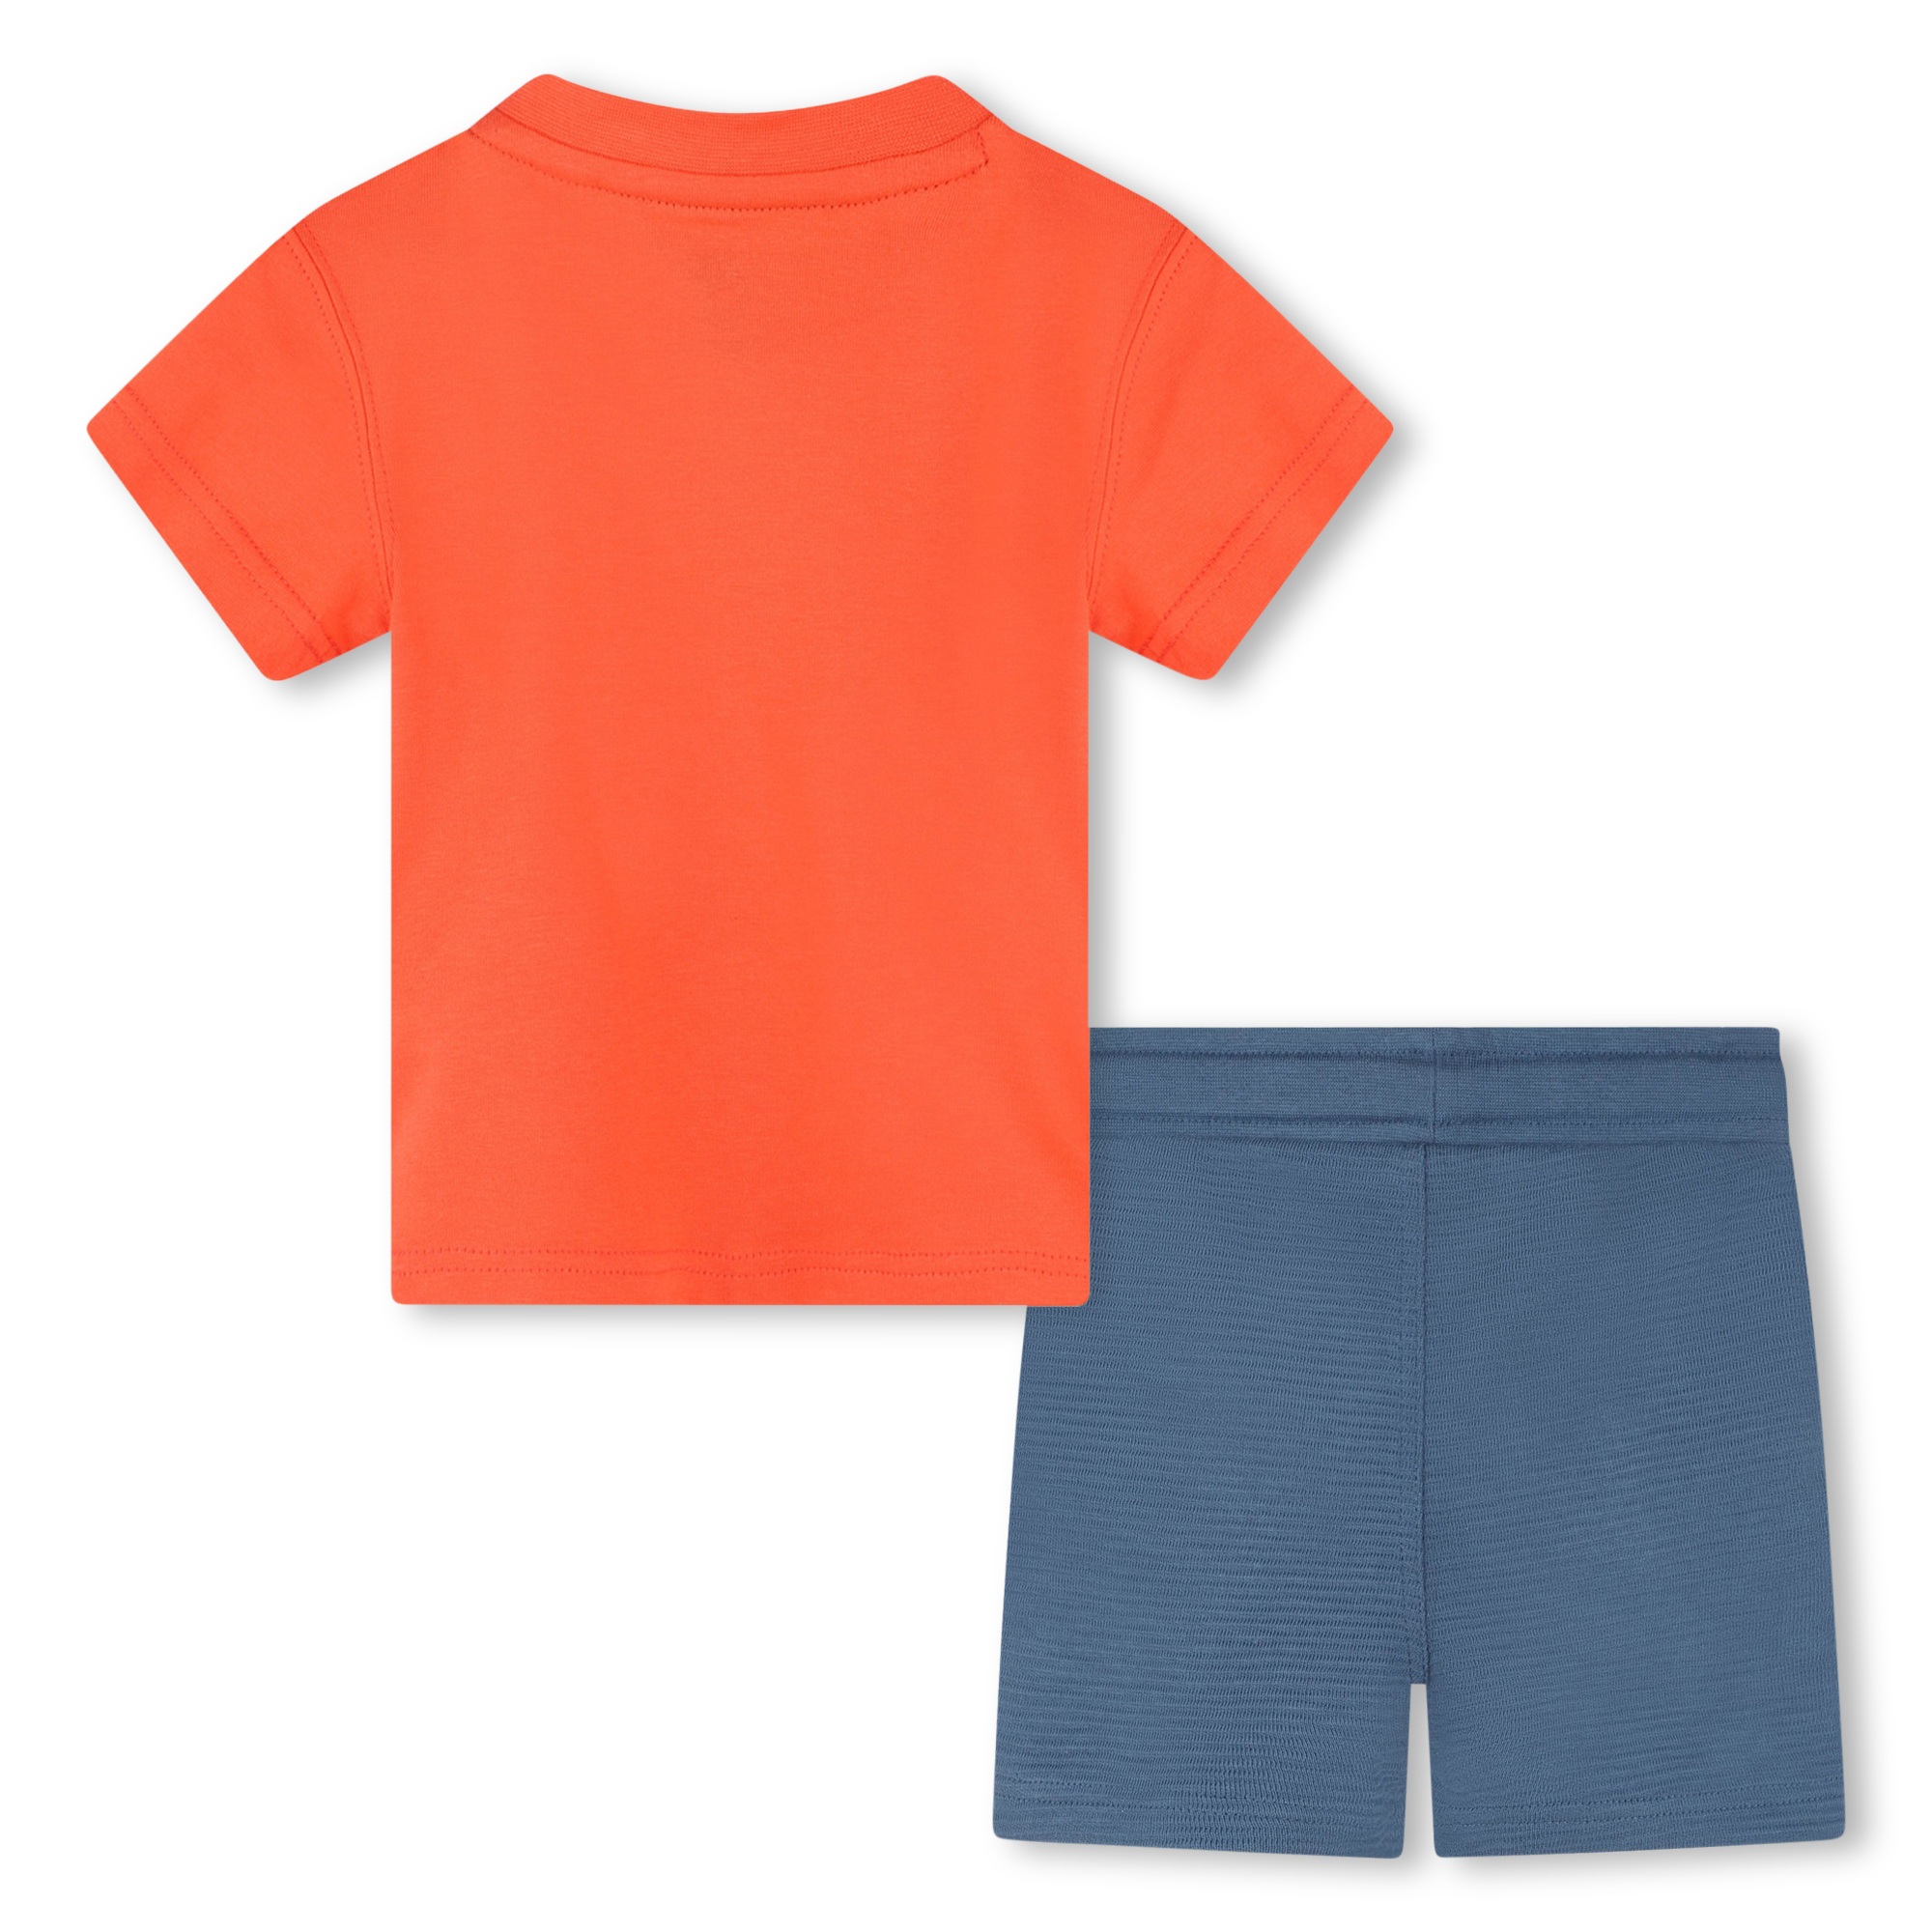 T-shirt and shorts set TIMBERLAND for BOY